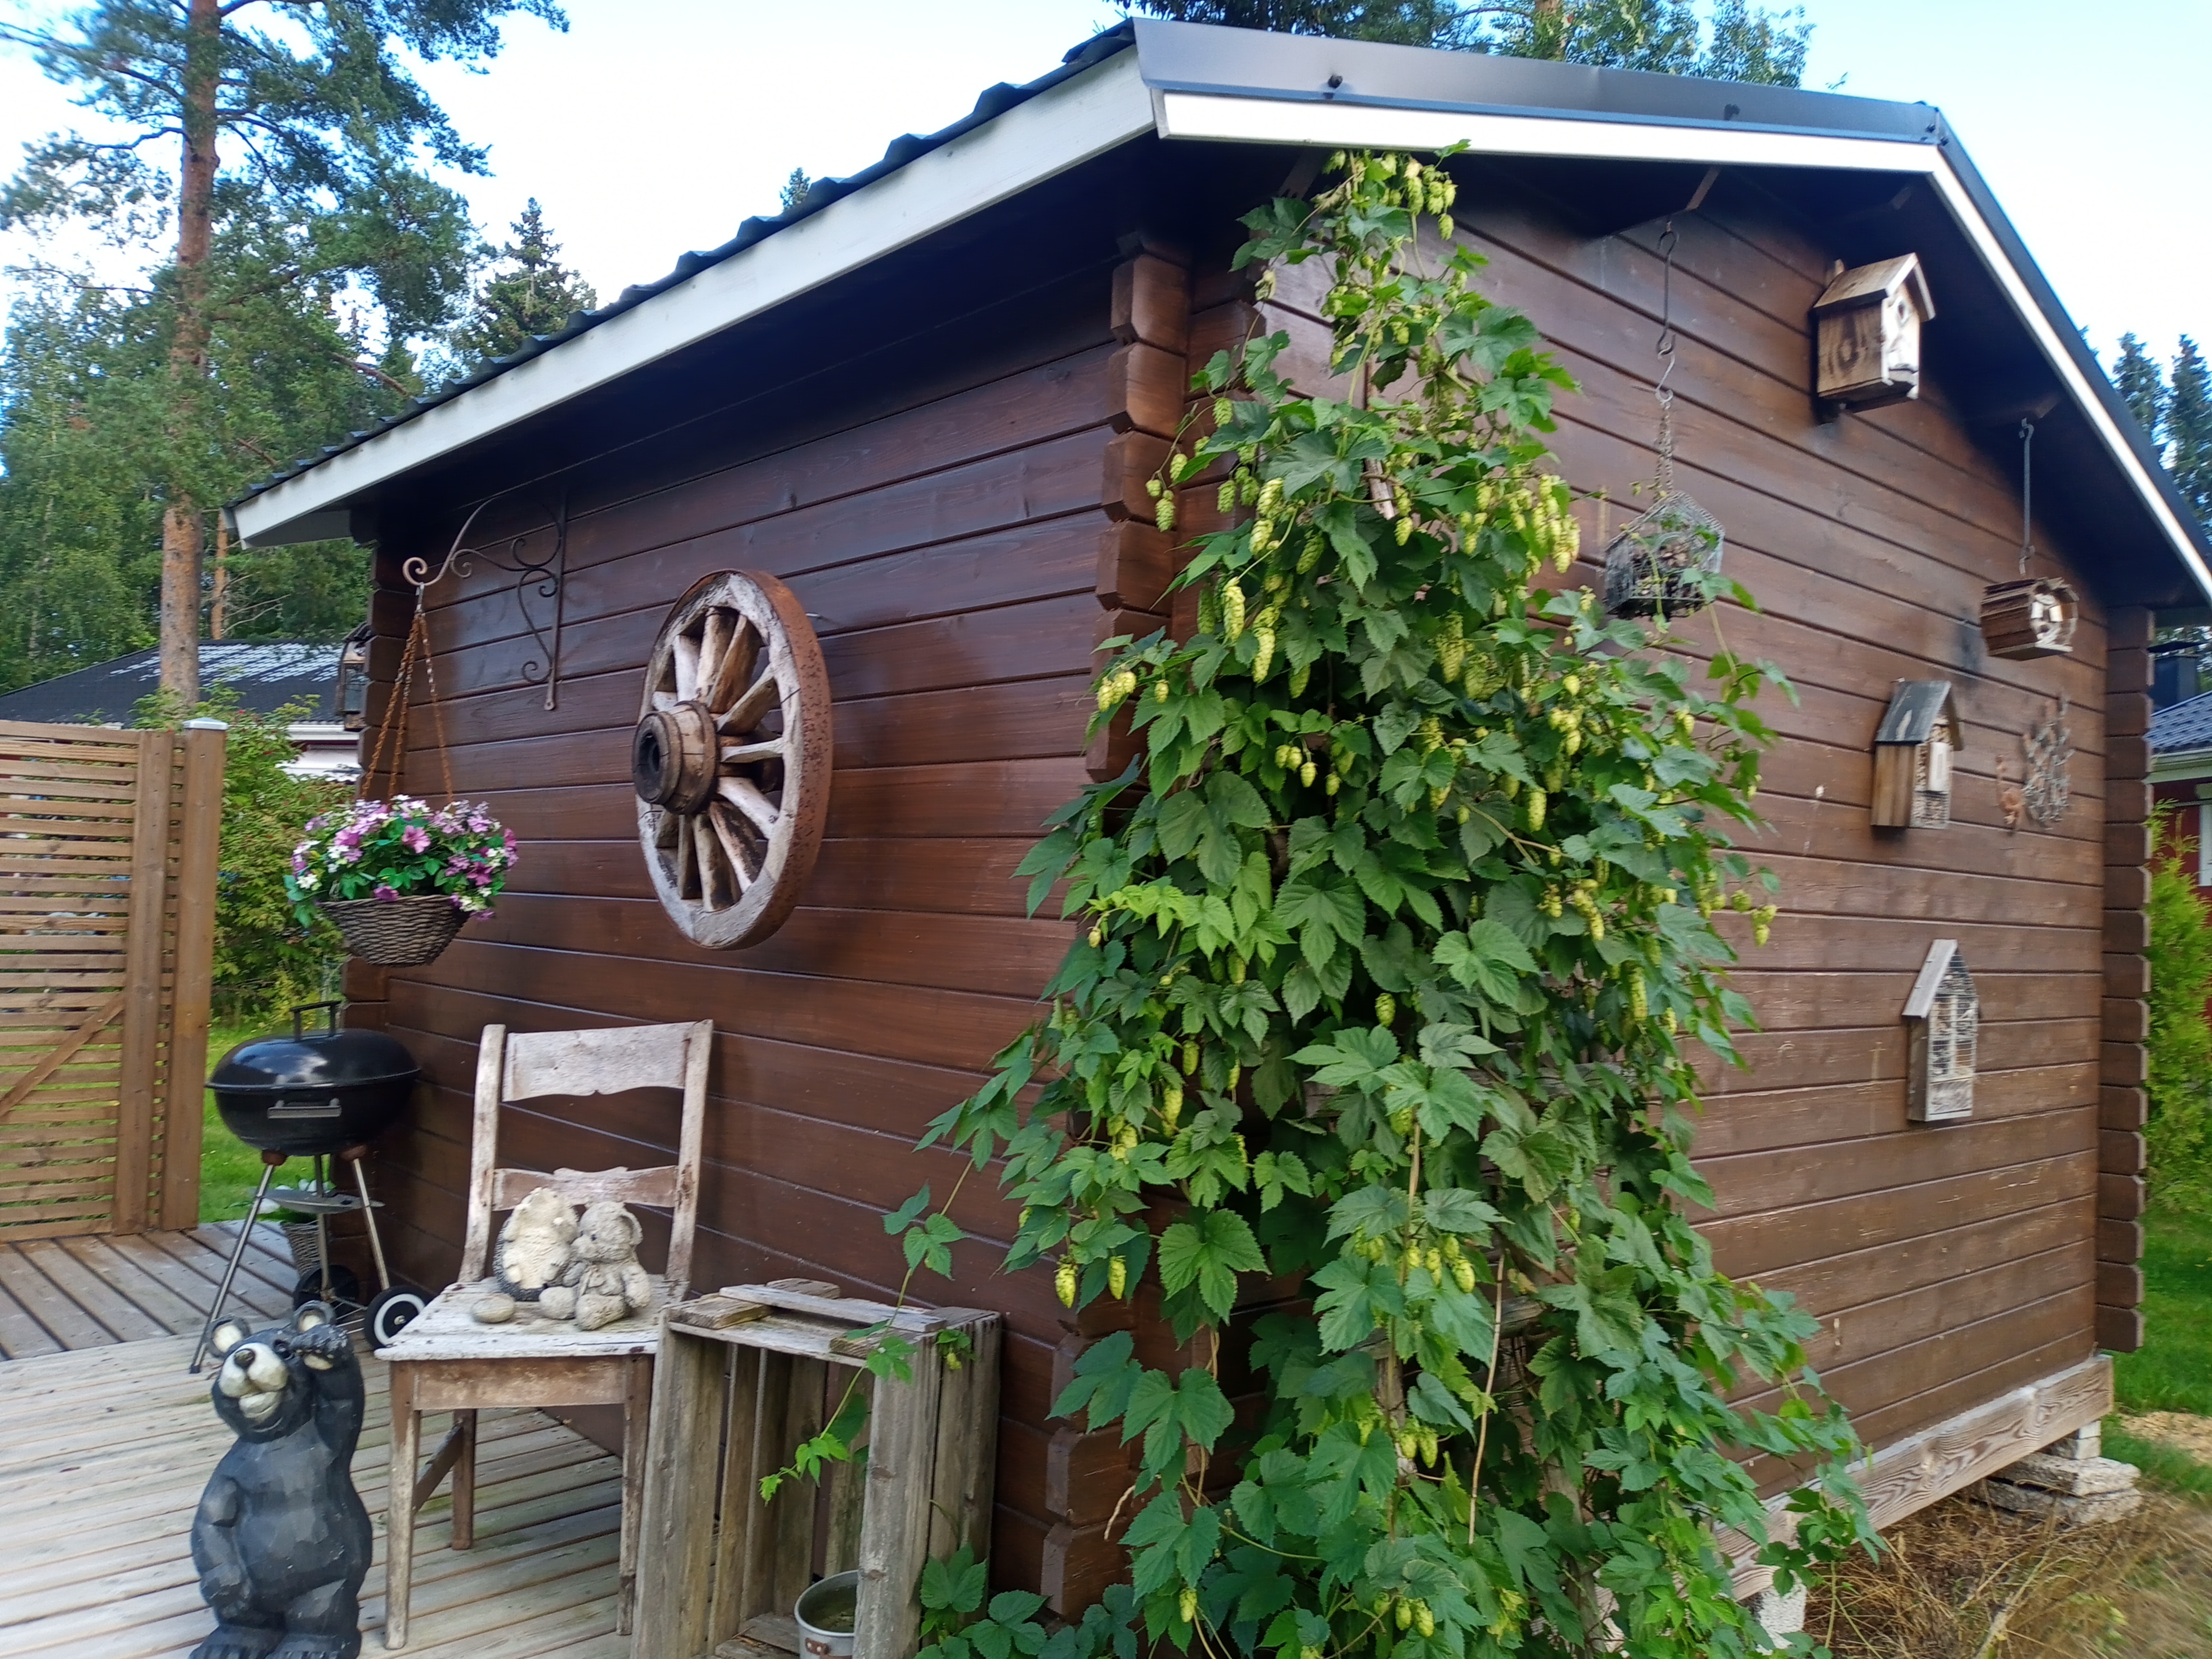 Yard cottage Villasukka - Guesthouses for Rent in Kauhajoki, Finland -  Airbnb